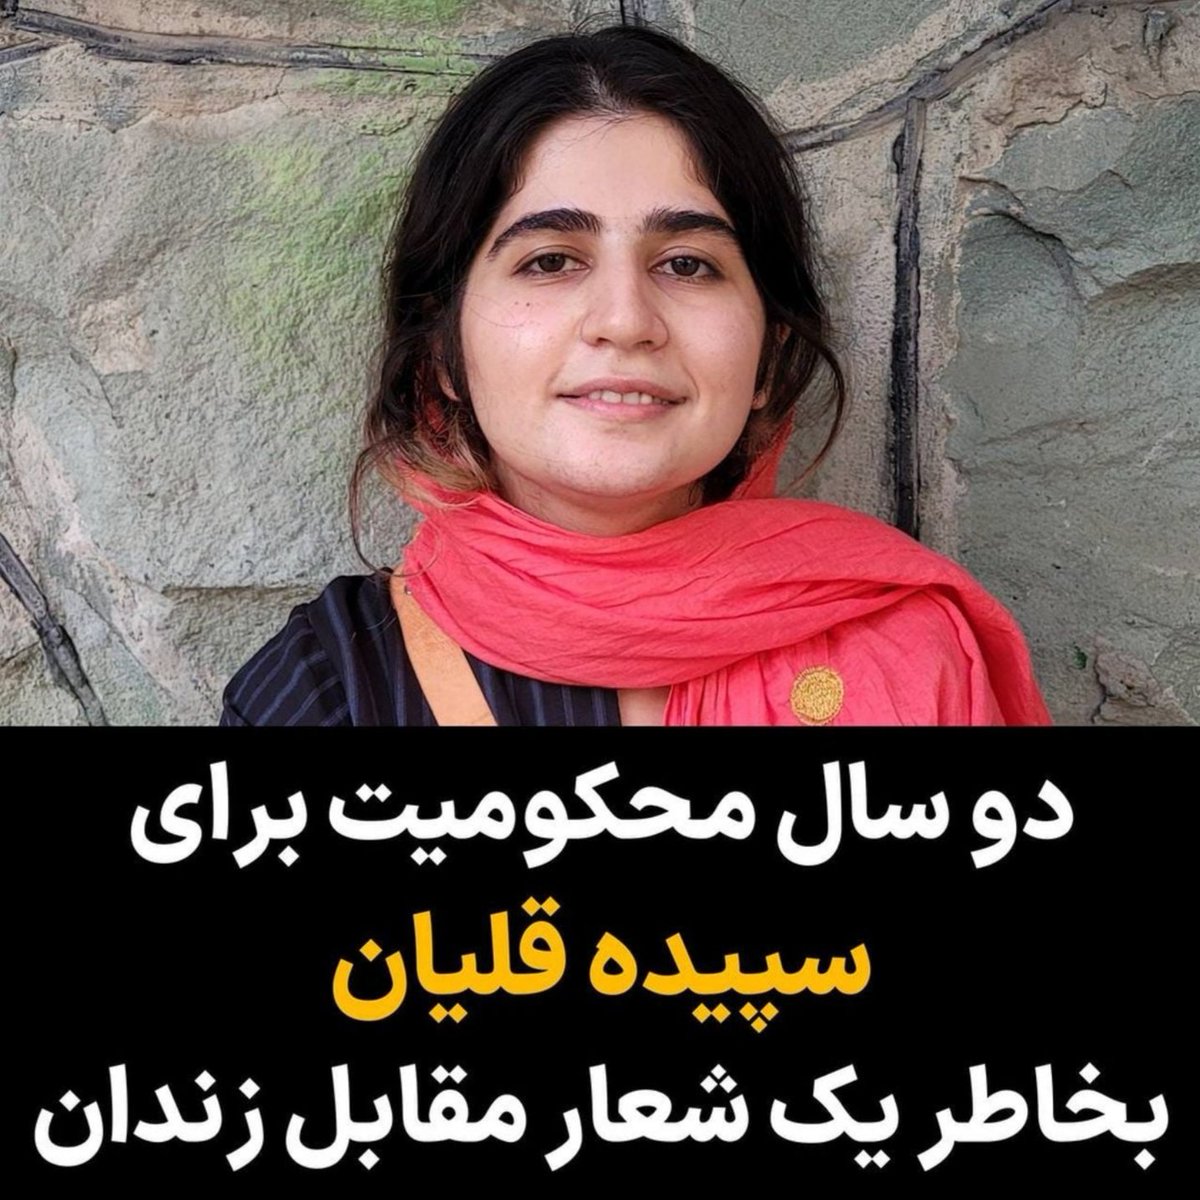 #SepidehQolian's brother, Mehdi, published a post on his Instagram page and wrote that his sister has been sentenced to two years for chanting in front of the prison right after her release. (1/3)

#IranRevolution #MahsaAmini #IRGCterrorists #MEKterrorists